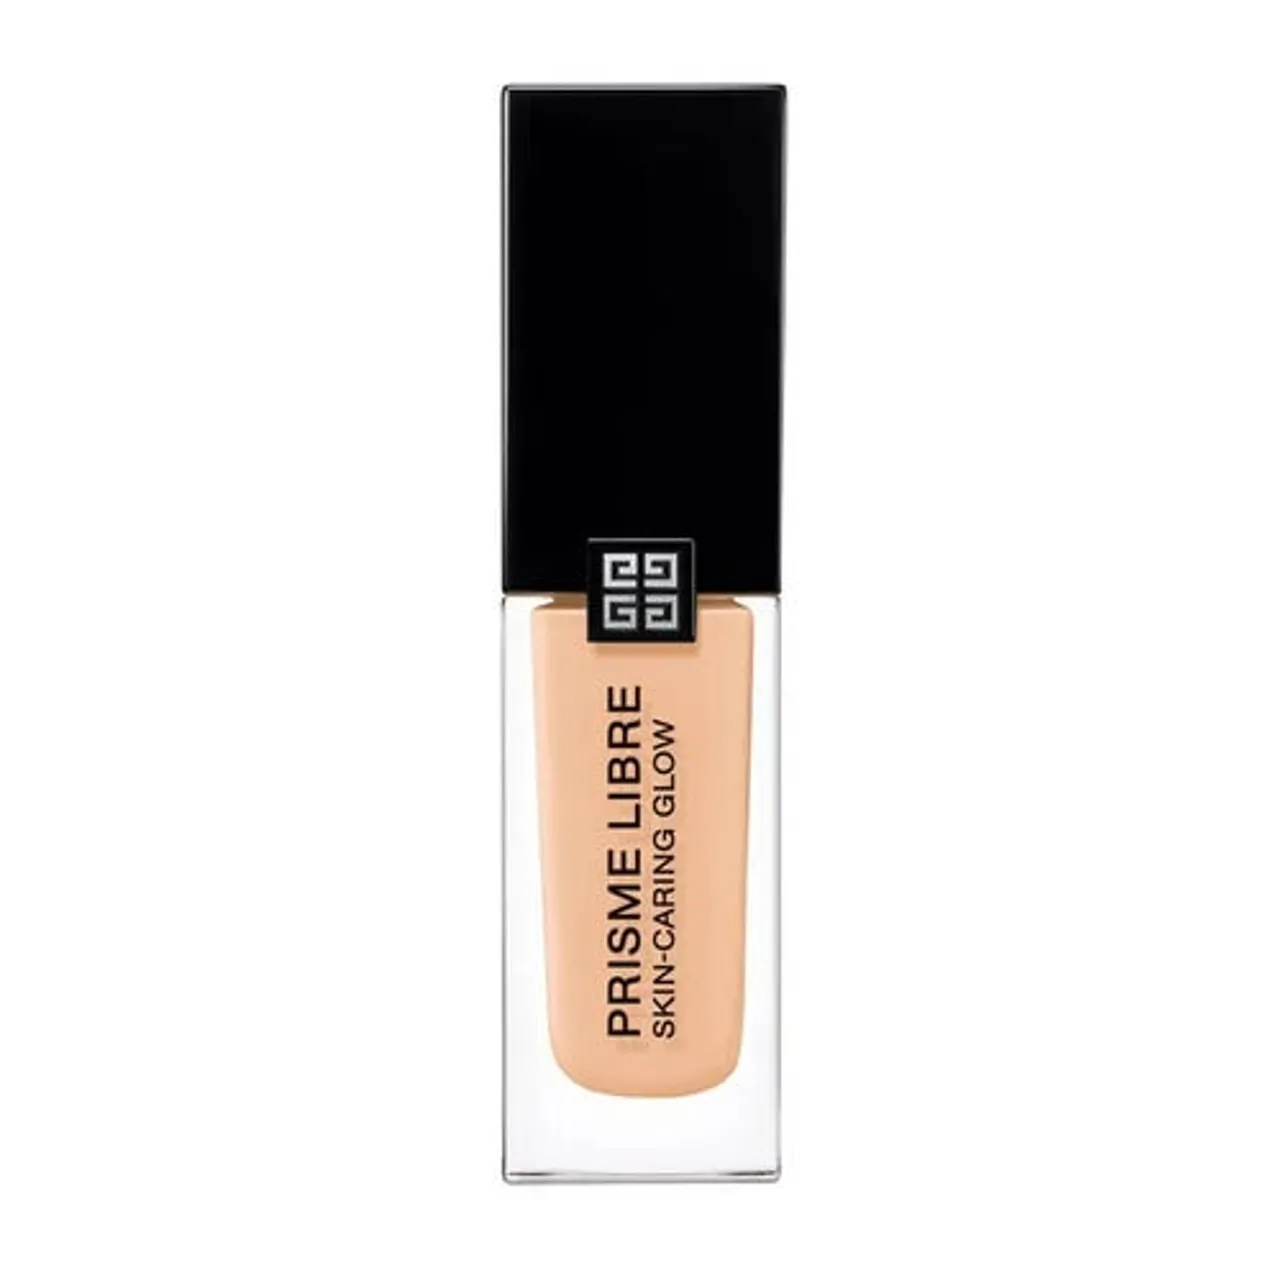 Givenchy Prisme Libre Skin-Caring Glow Hydrating Foundation 30 ml